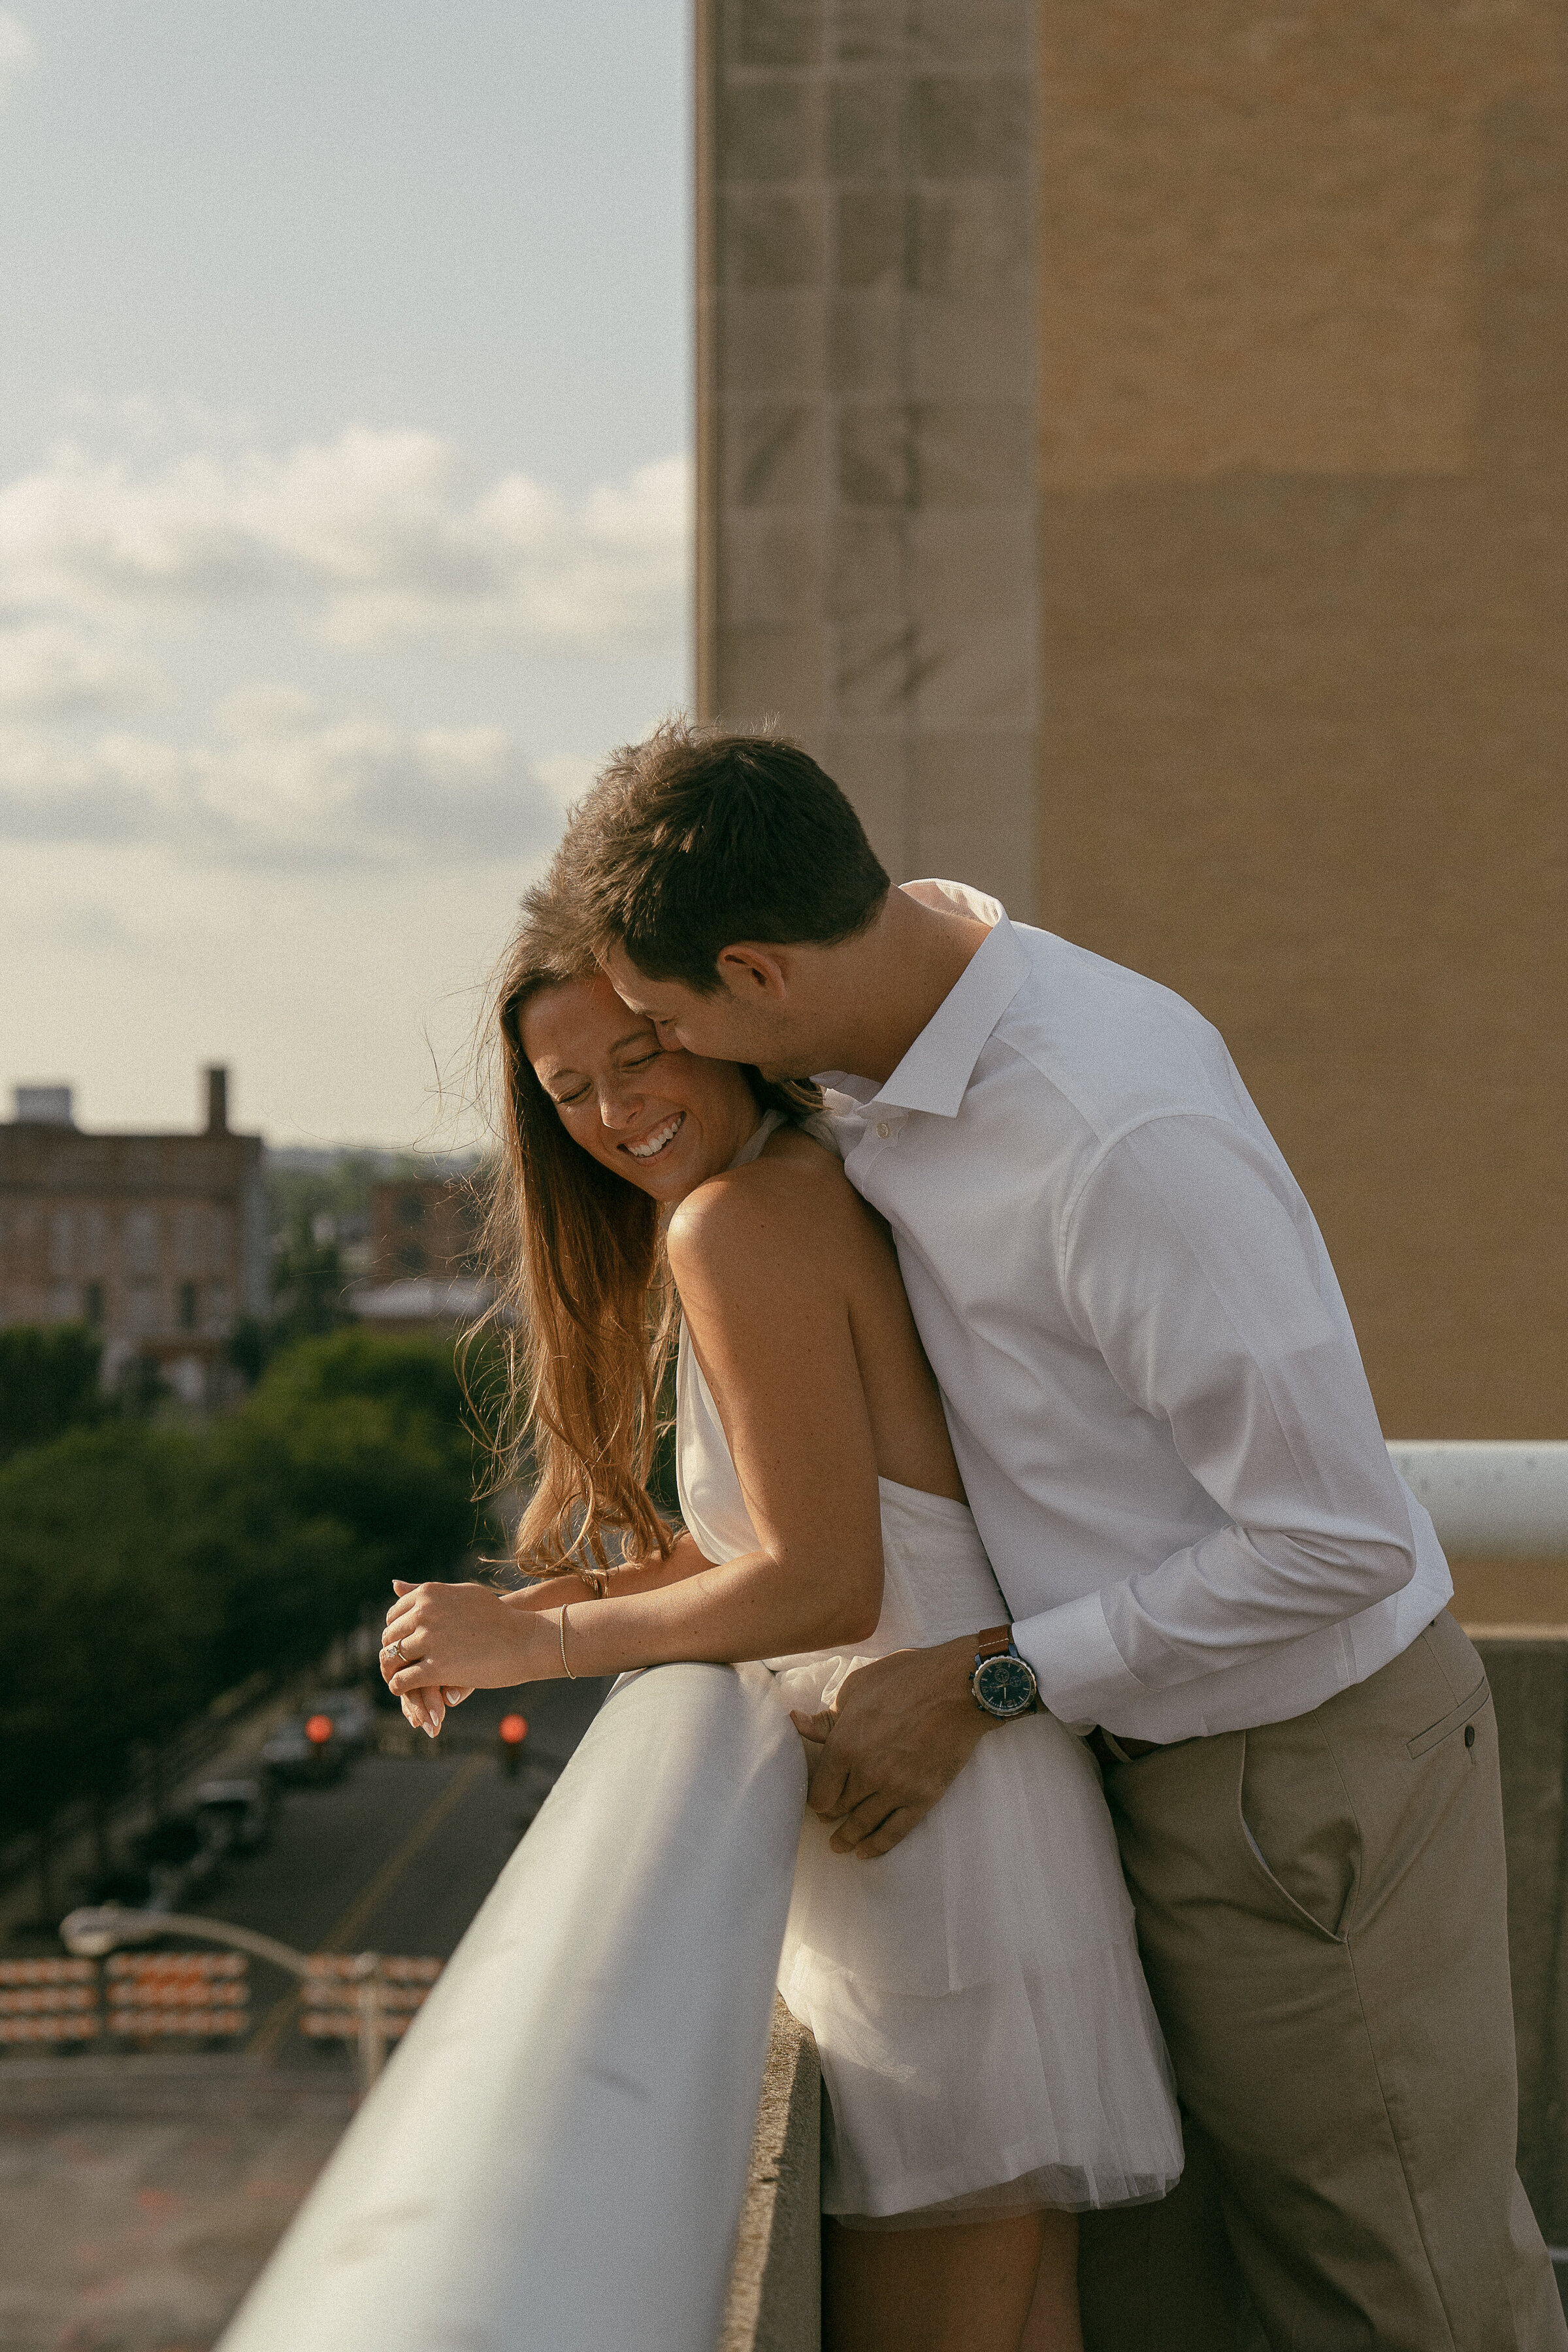 Couple sharing a romantic moment on a city rooftop.